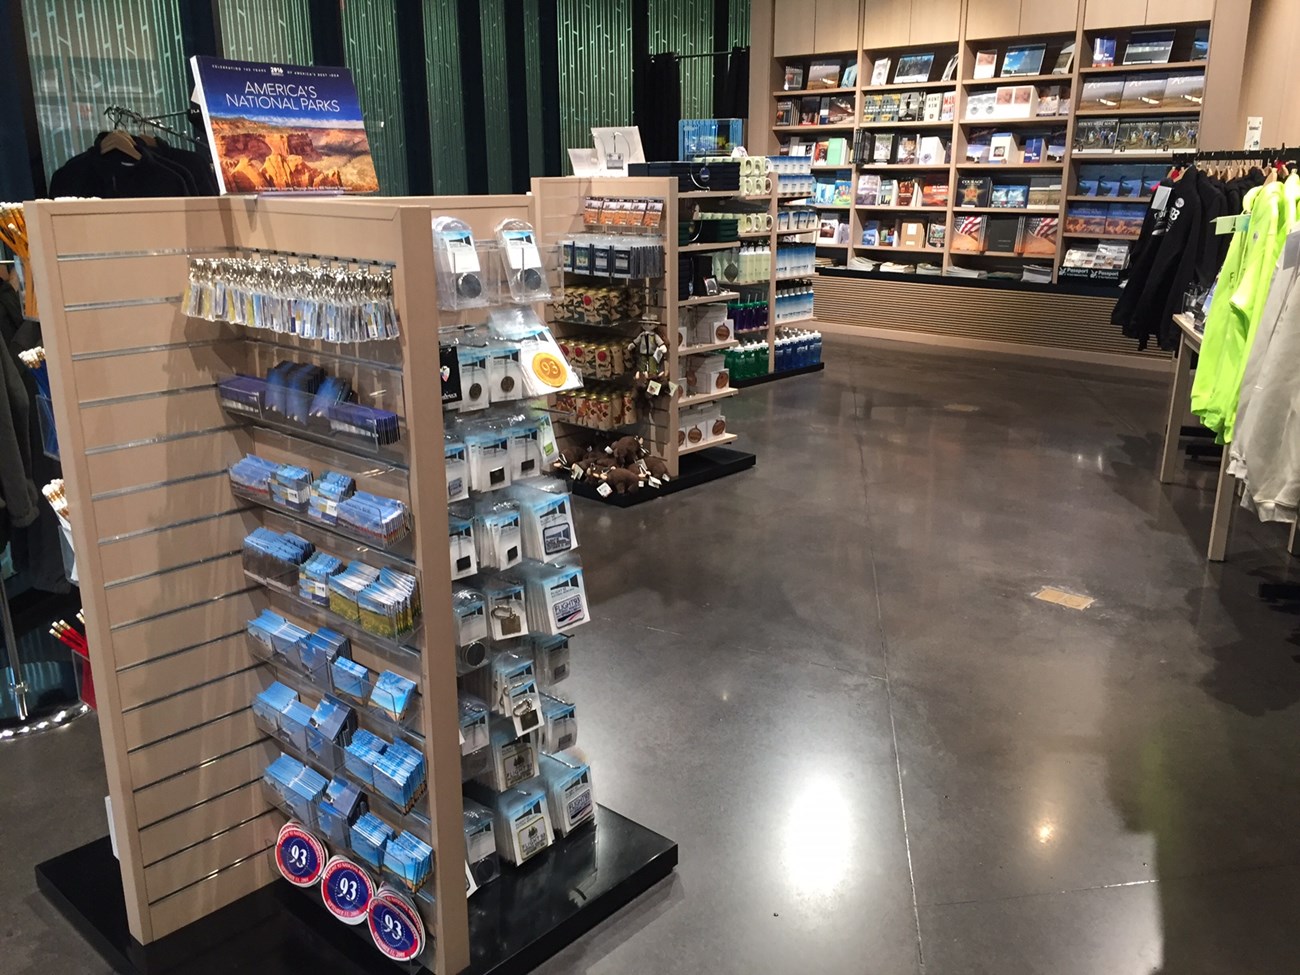 Interior view of the visitor center book store featuring books and other educational memorabilia.